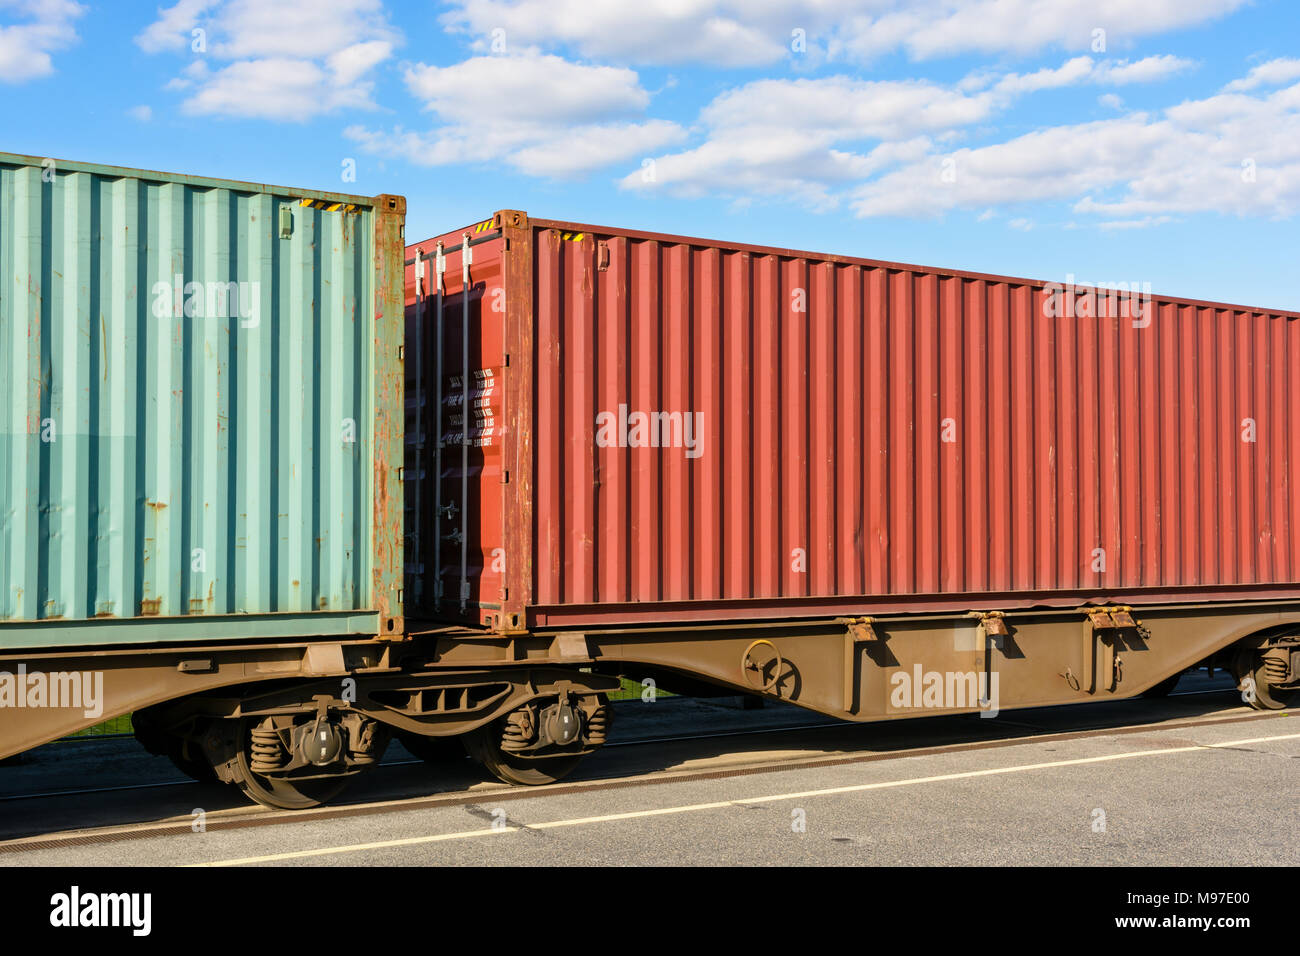 Two containers on a flat car train parked in a shipping yard in the suburbs of Paris, France. Stock Photo